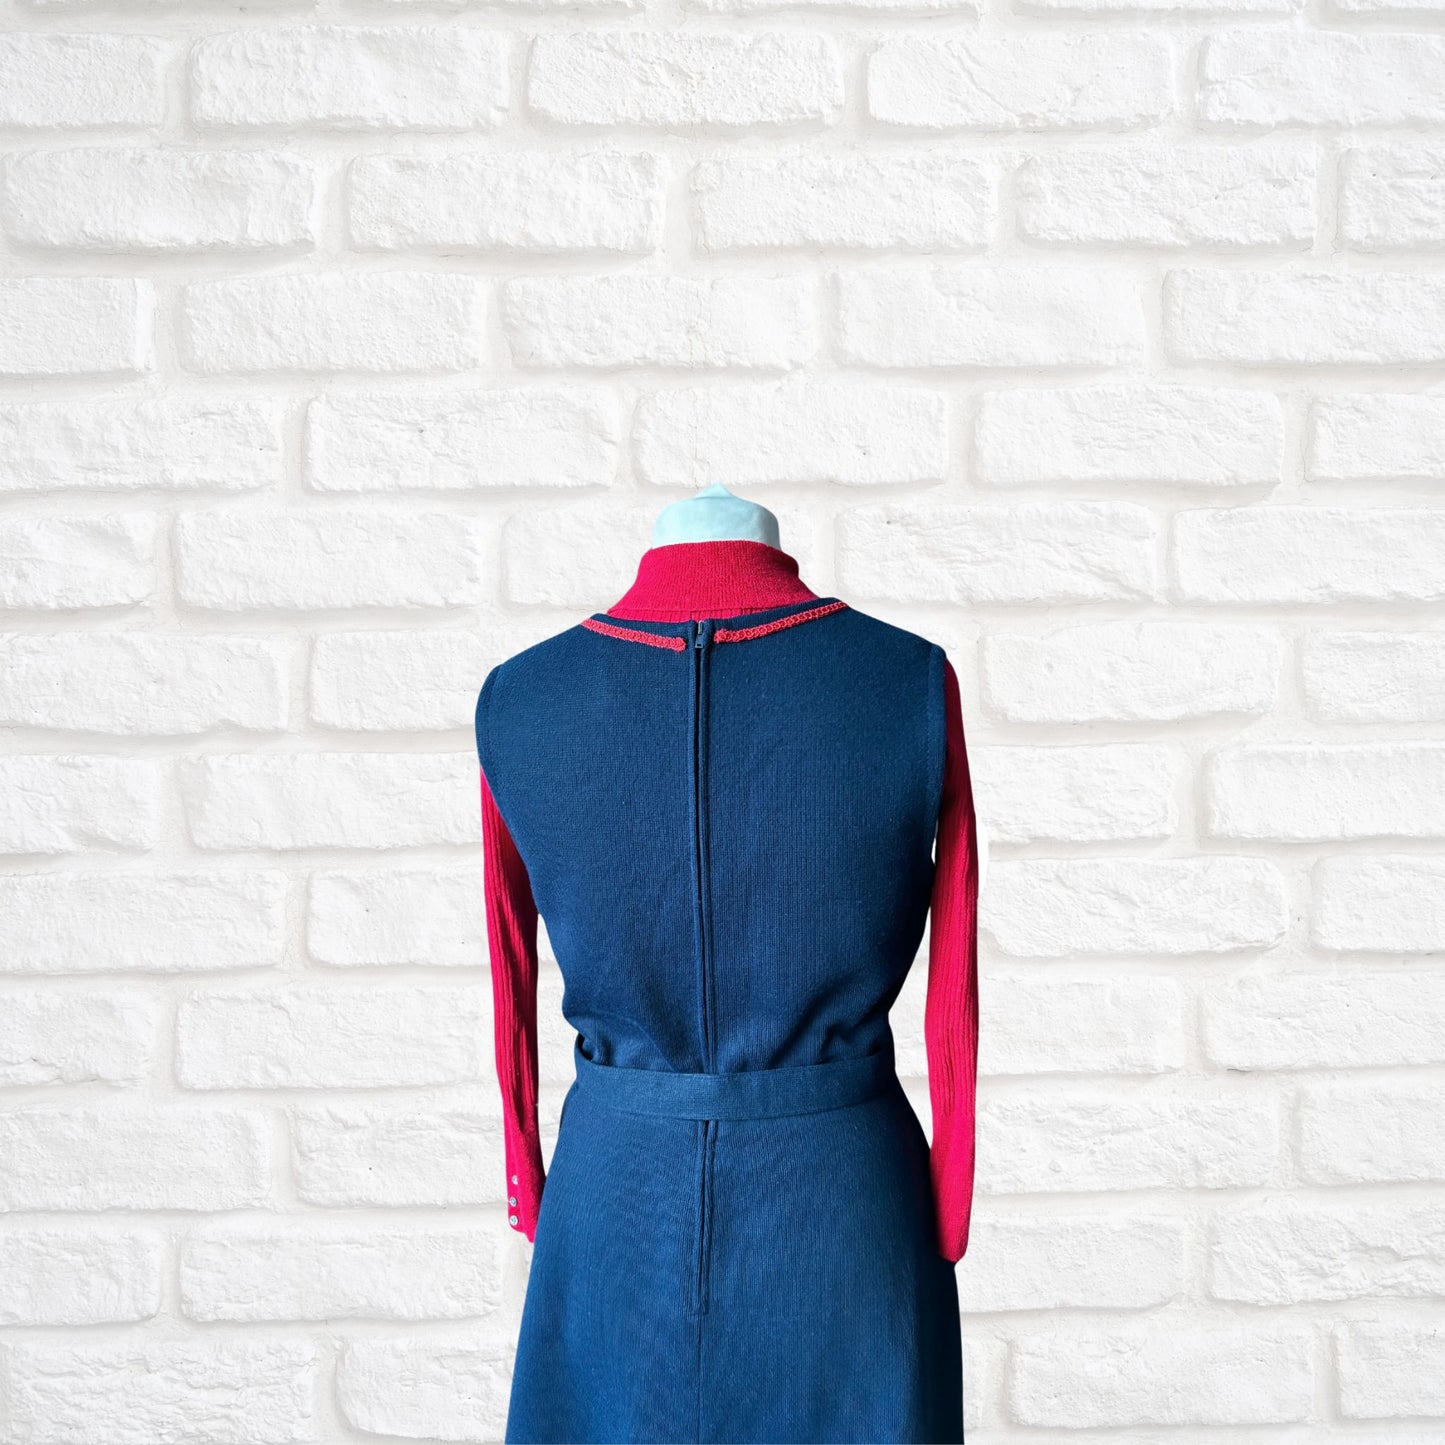 60s navy blue pinafore dress with red brocade trim and matching belt. Approx UK size 12-14